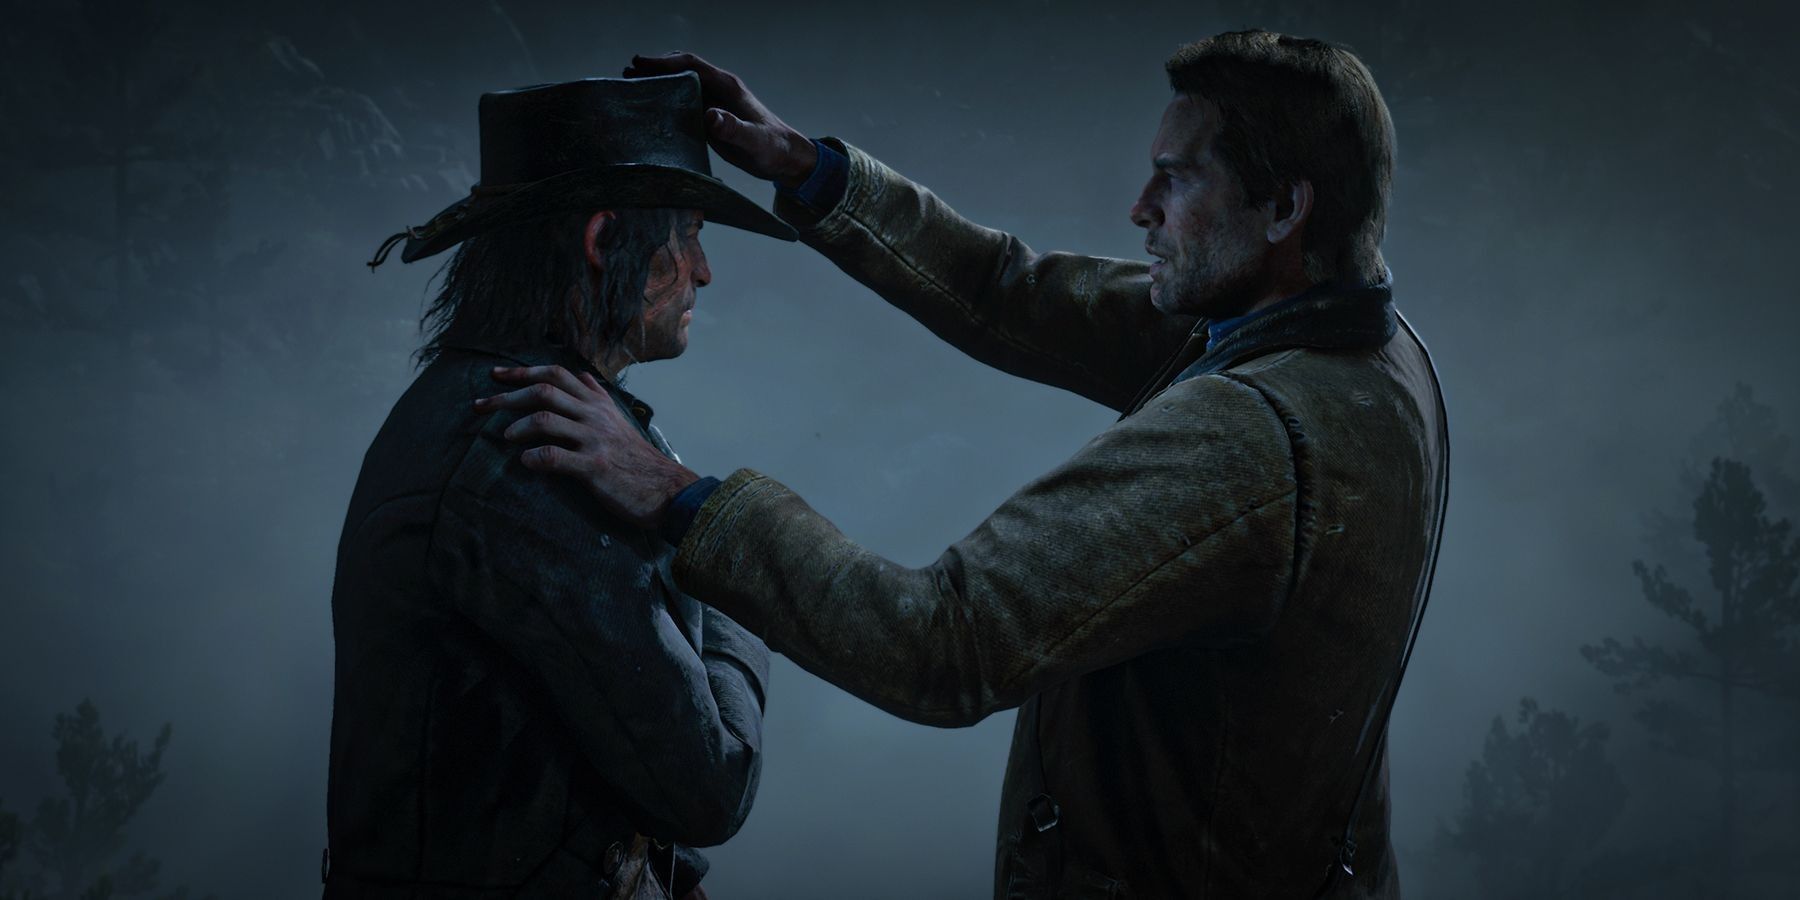 John and Arthur's friendship must be acknowledged in the Red Dead Redemption remaster.